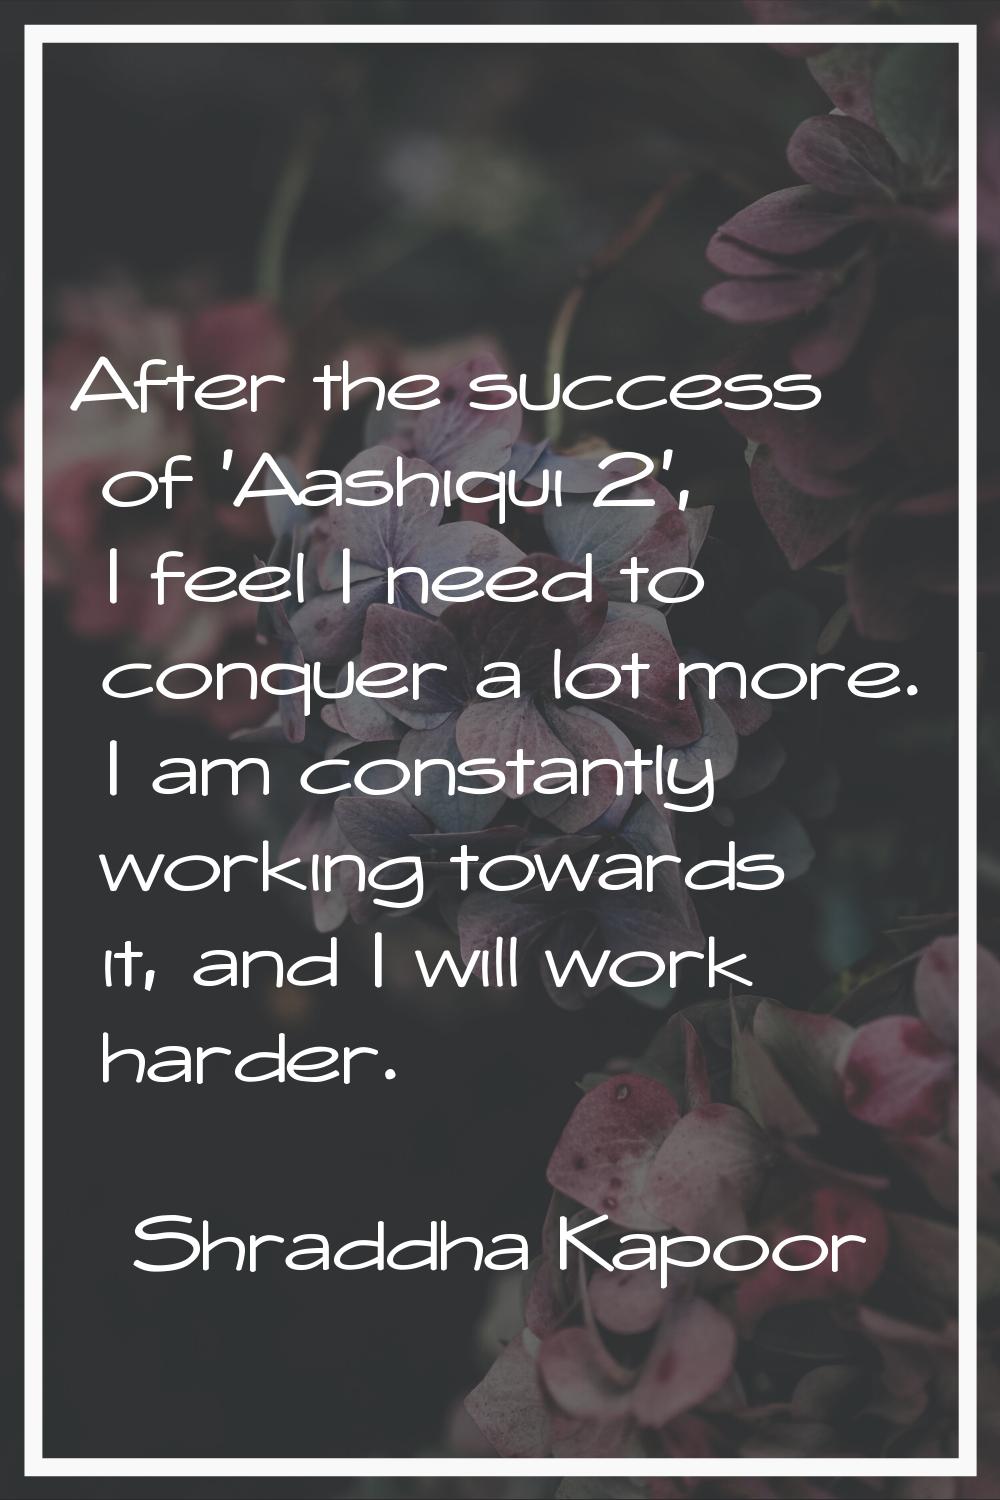 After the success of 'Aashiqui 2', I feel I need to conquer a lot more. I am constantly working tow